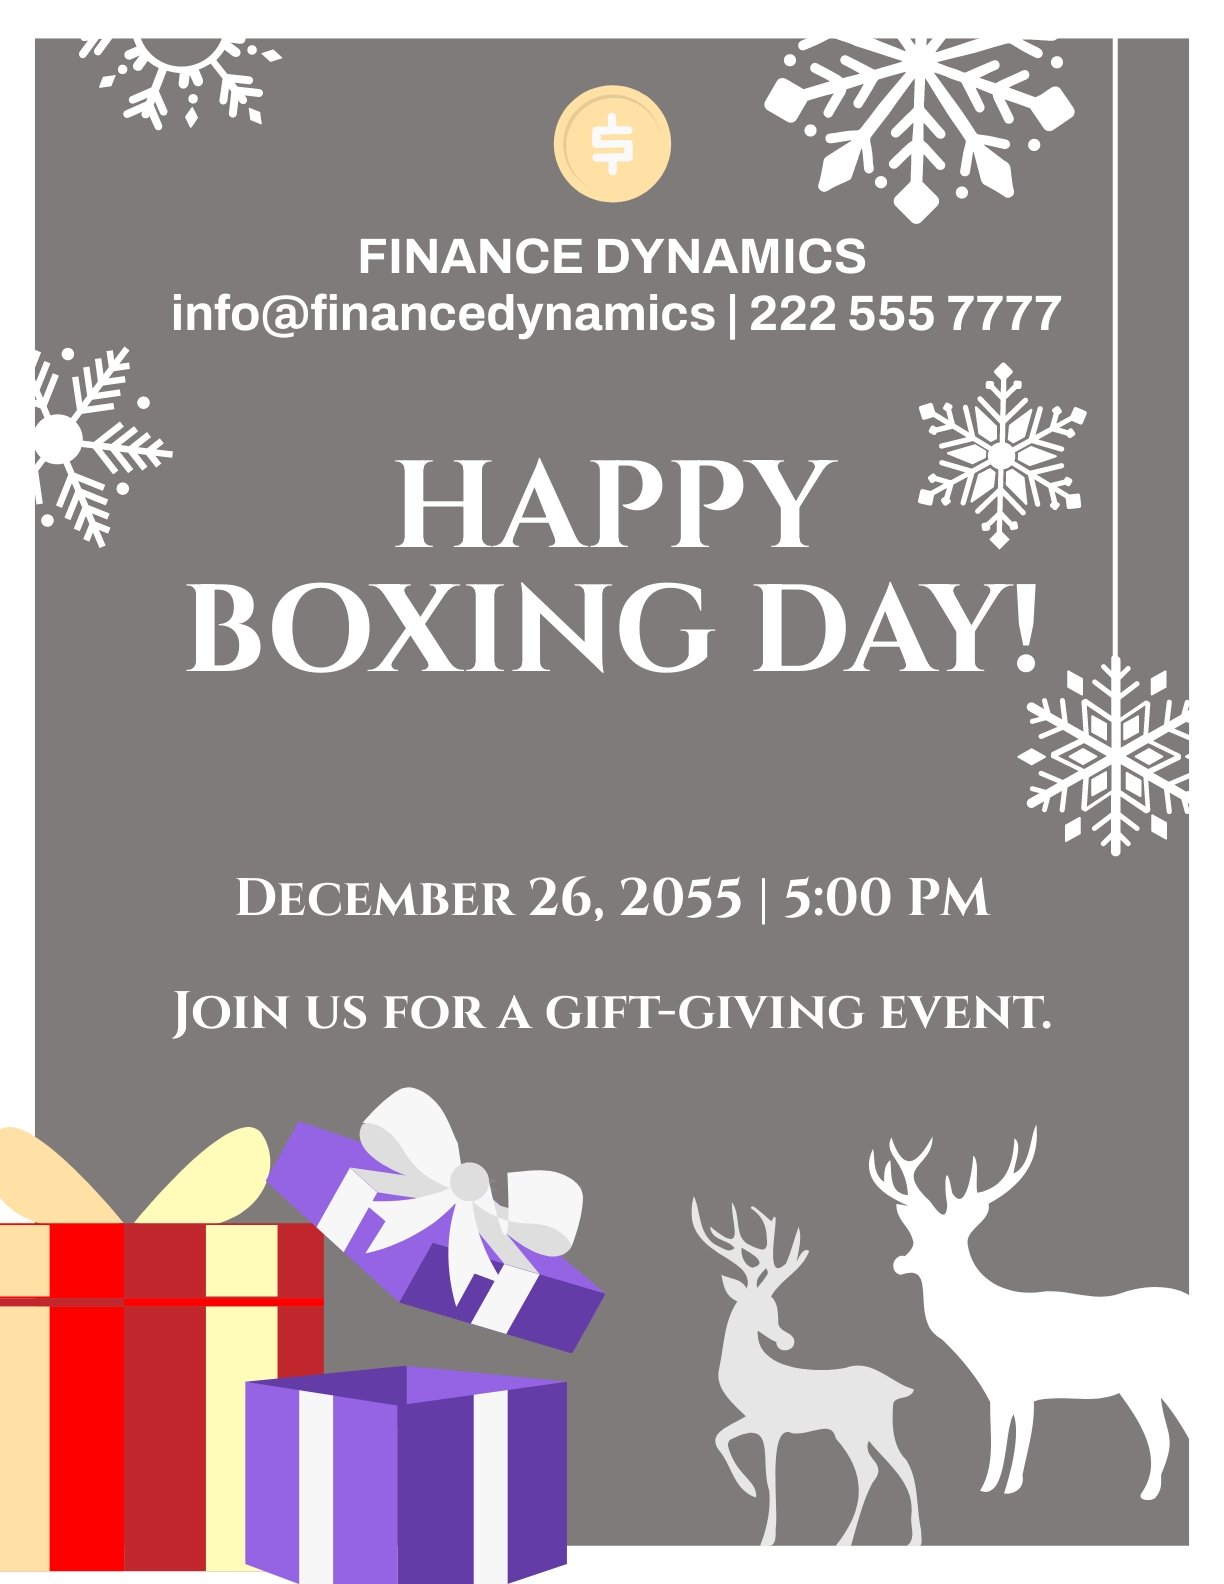 Free Happy Boxing Day Flyer in Word, Google Docs, Illustrator, PSD, EPS, SVG, JPG, PNG